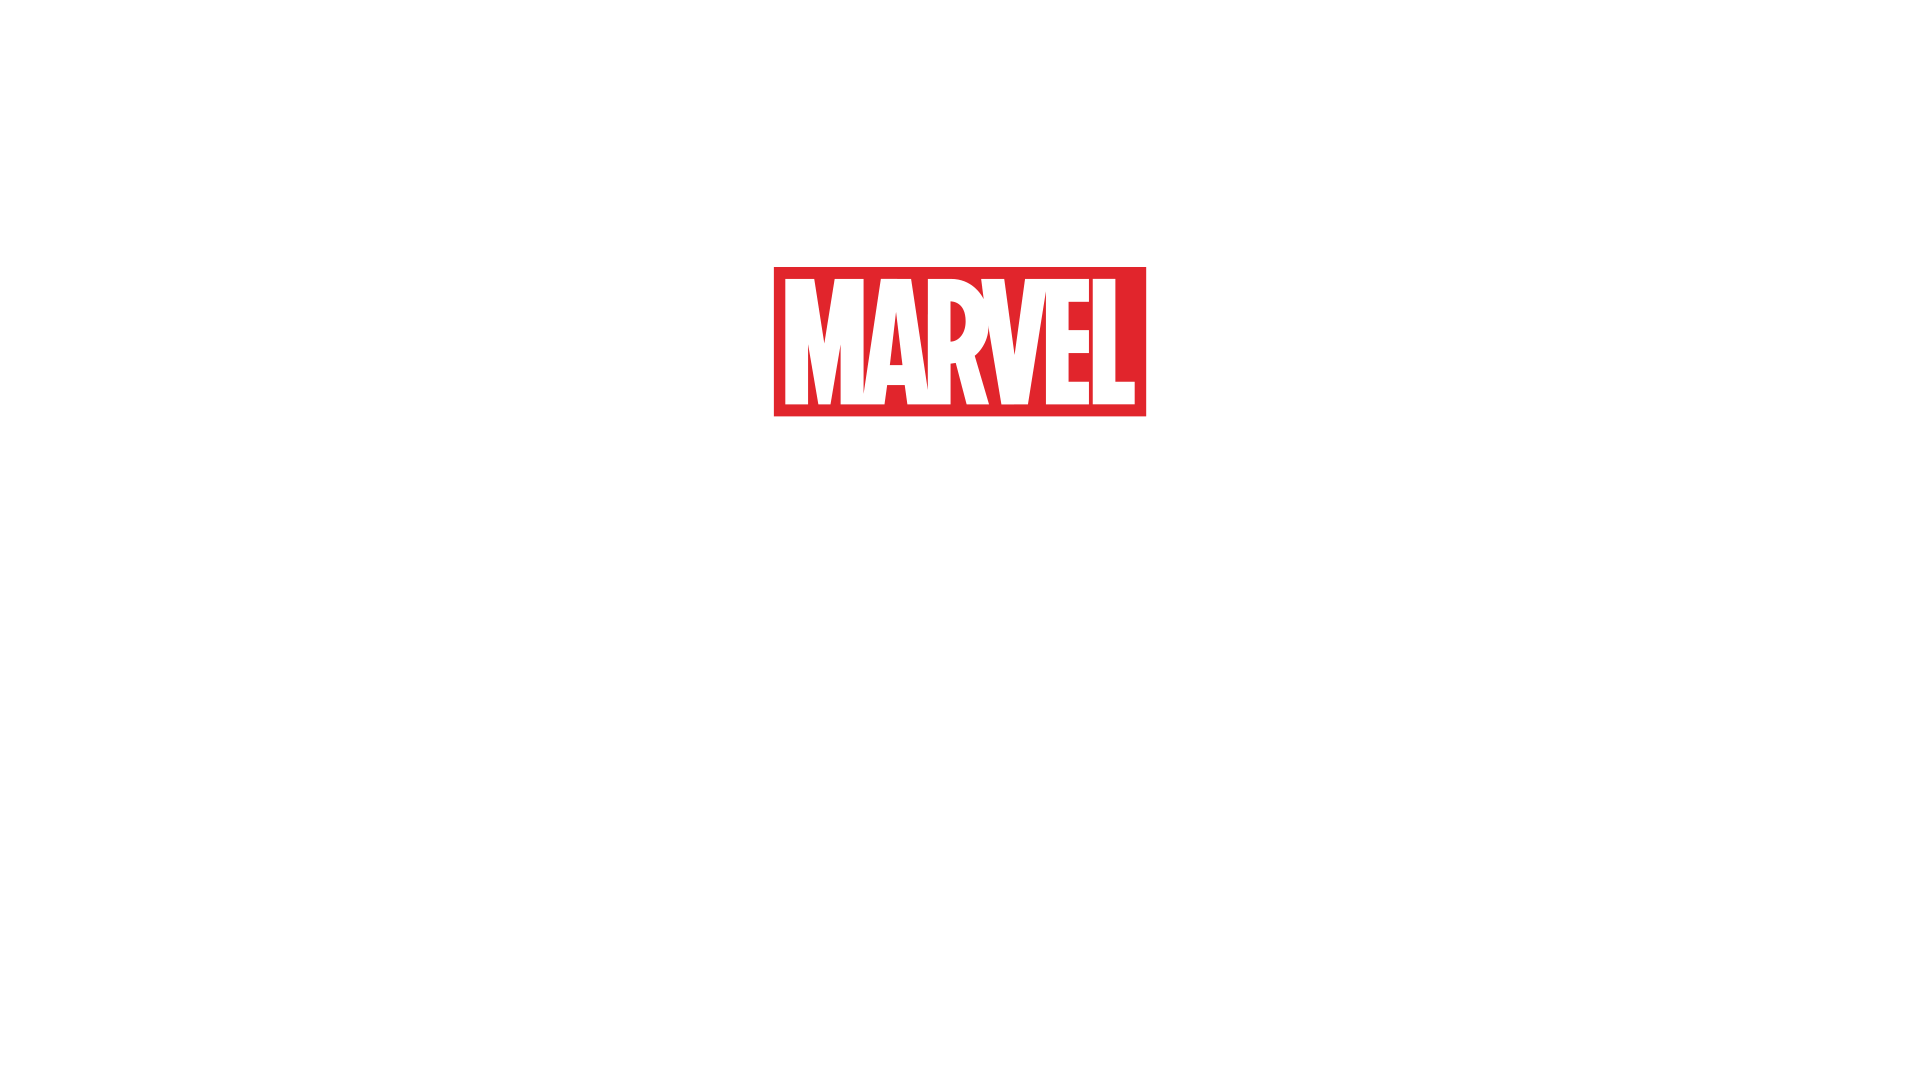 iron fist free online streaming